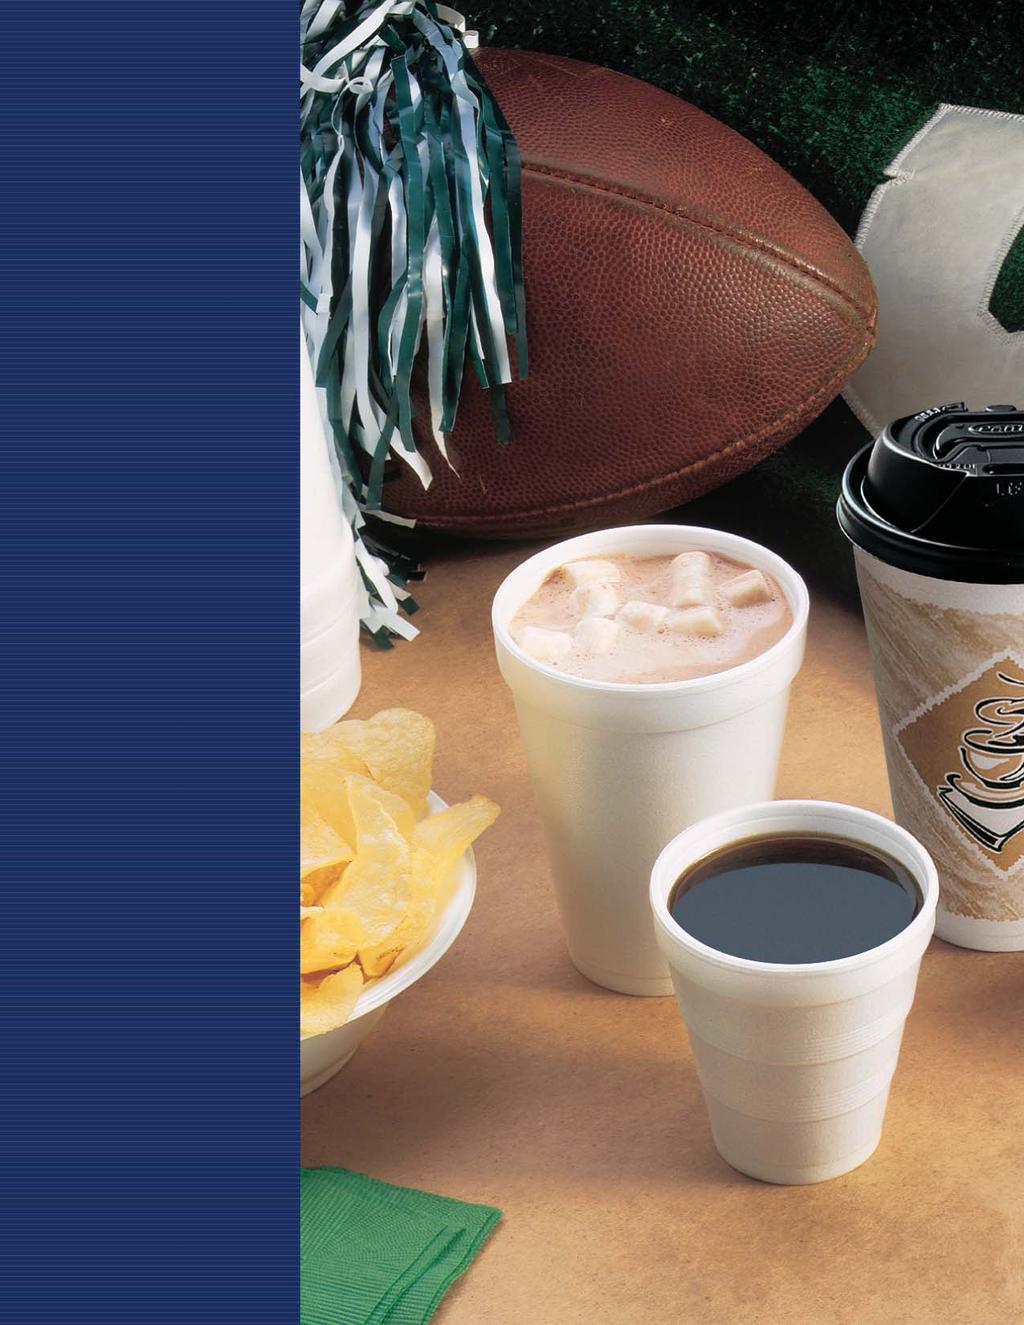 Dart Insulated Beverage Cups are available in 6.4 ounce through 20 ounce sizes. Because of their insulation, they act as 2 Cups in One, ideal for use with both hot and cold beverages.